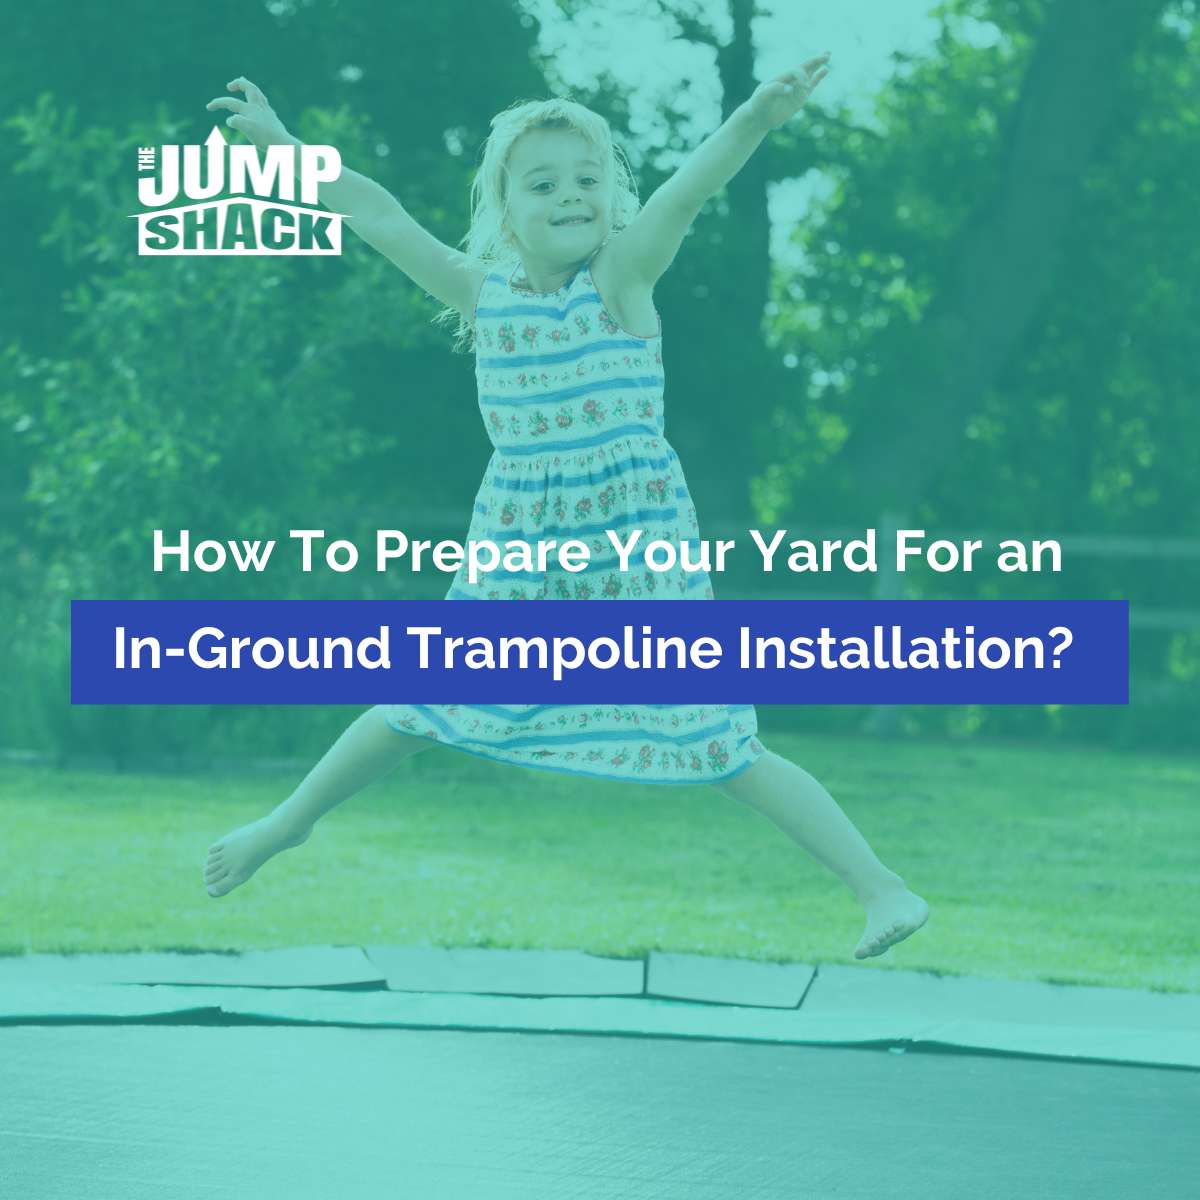 How To Prepare Your Yard For An In-Ground Trampoline Installation?